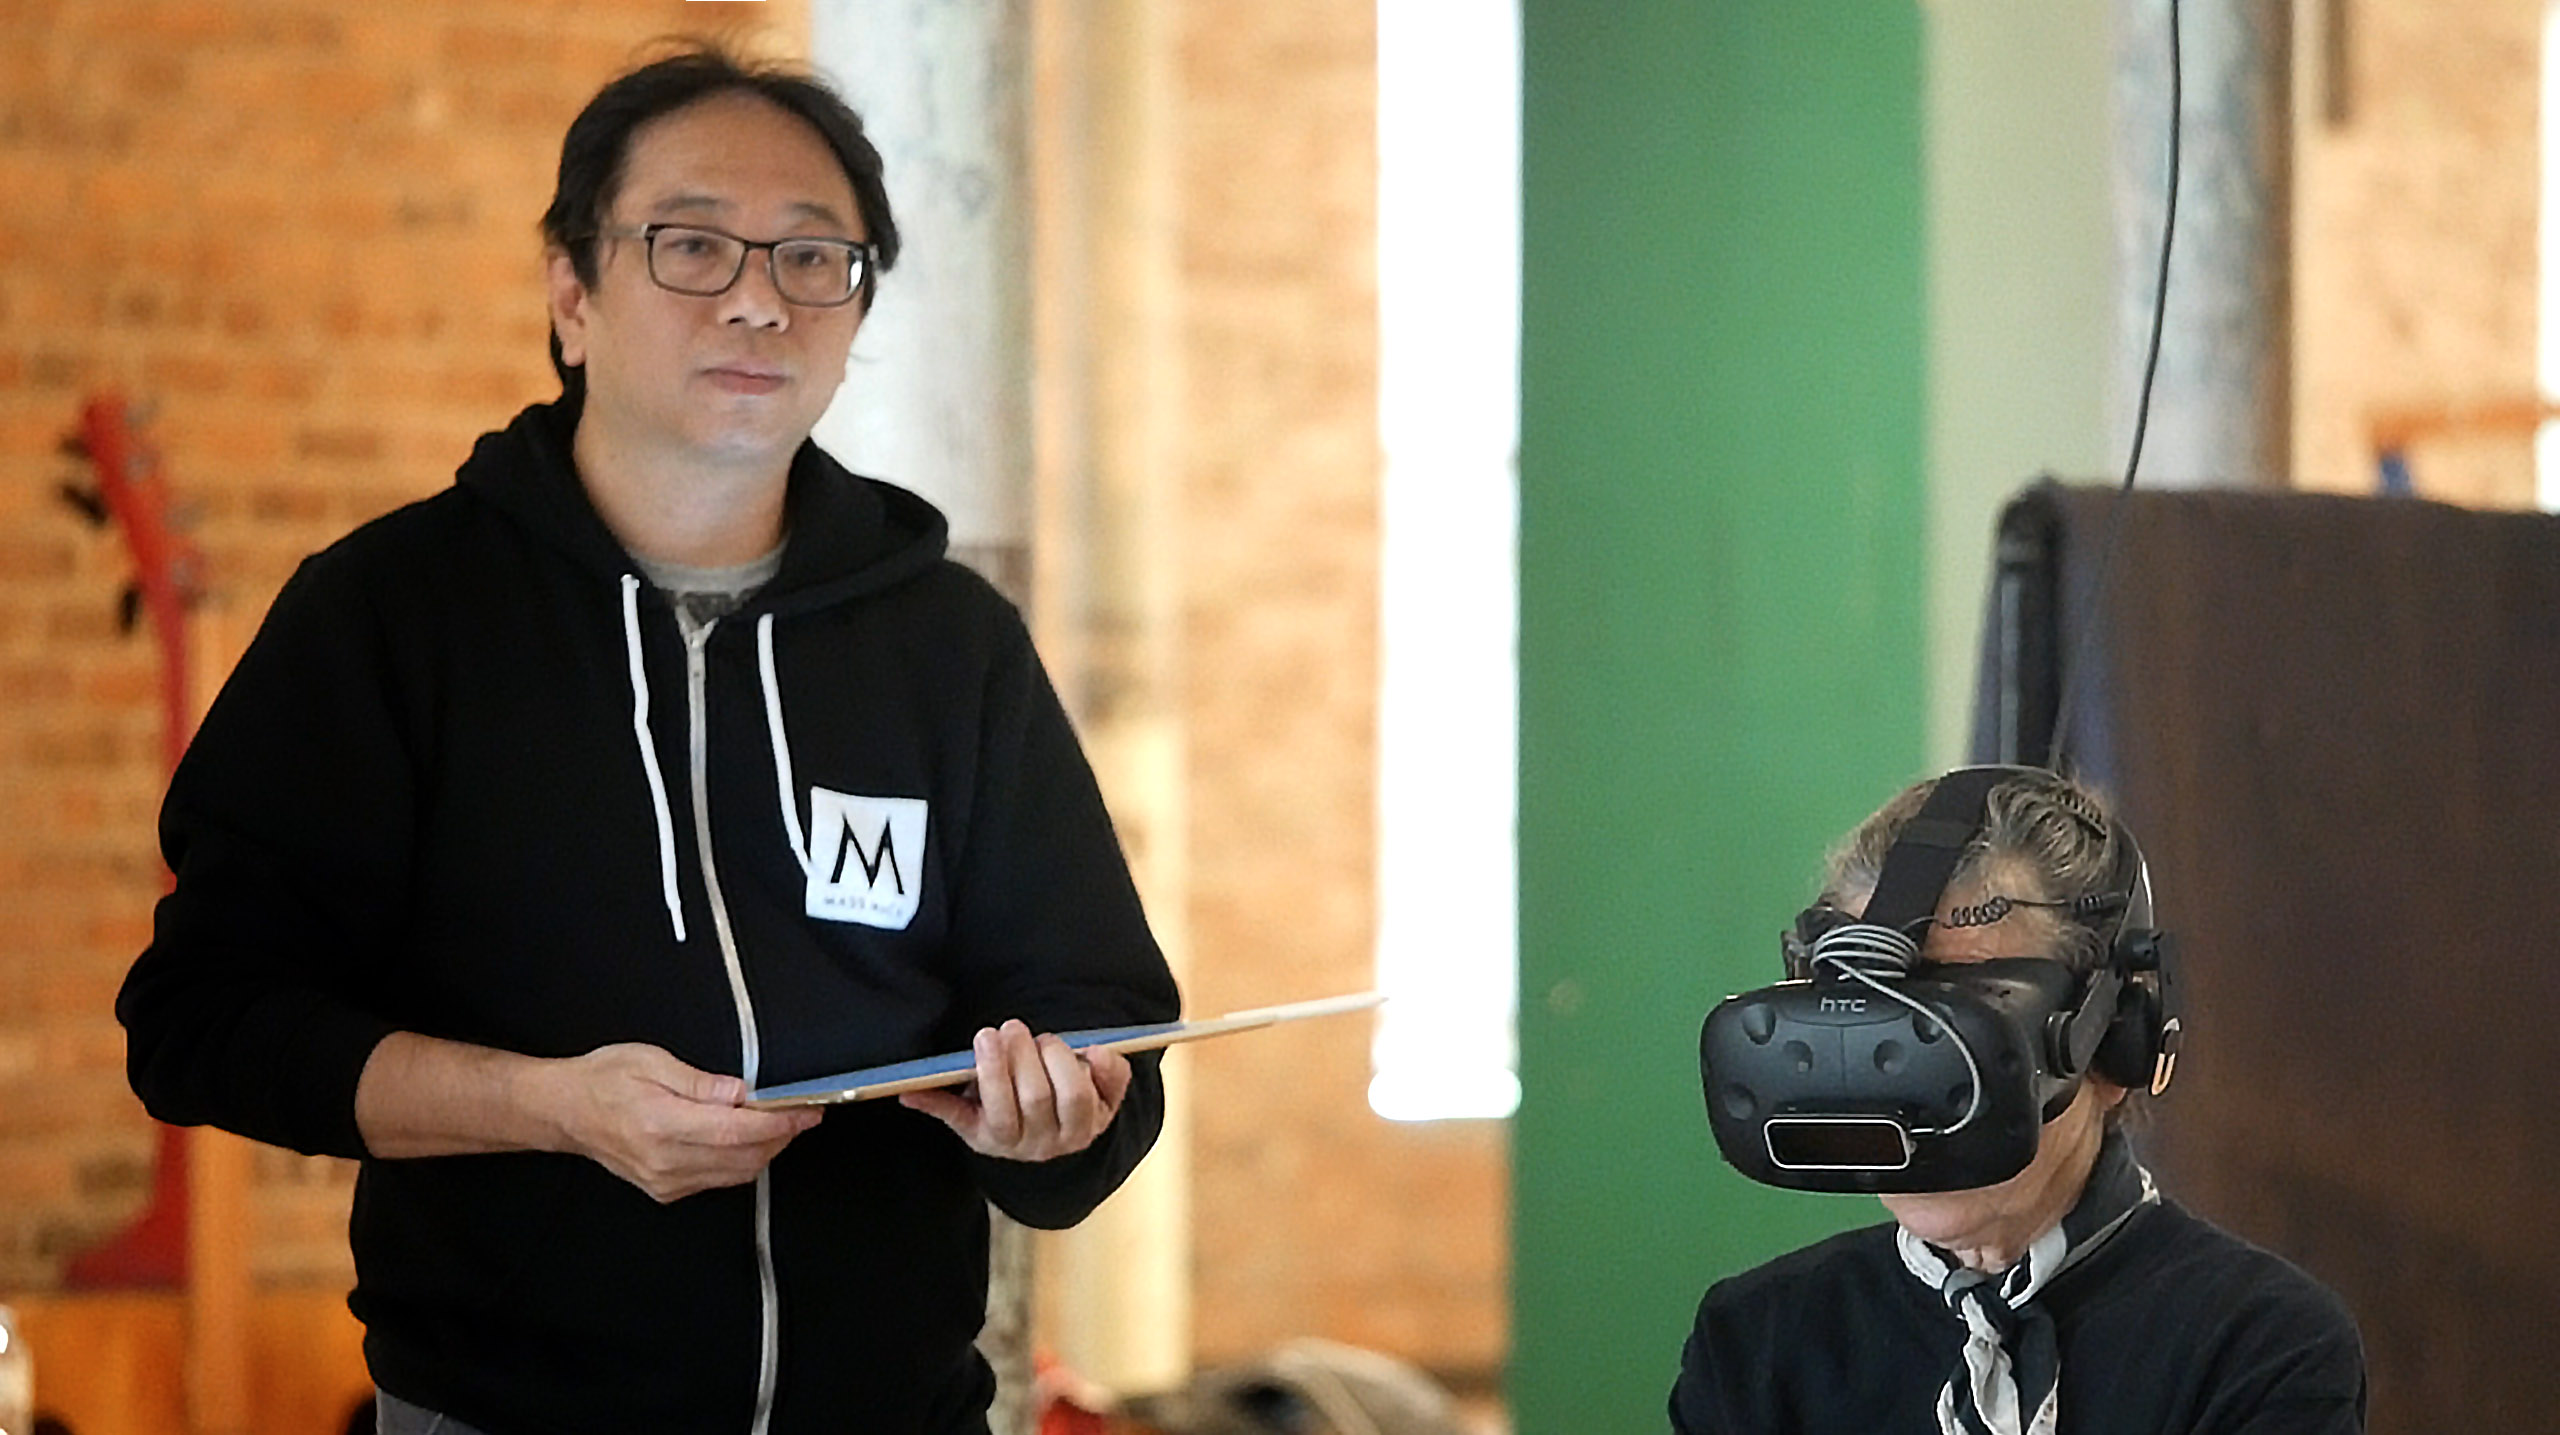 Laurie Anderson+ Hsin-Chien Huang  | La Camera Inssabiata  VR-Headsets, Hand held device, computer, VR interactive imagery, 2016 15 min. 的圖說